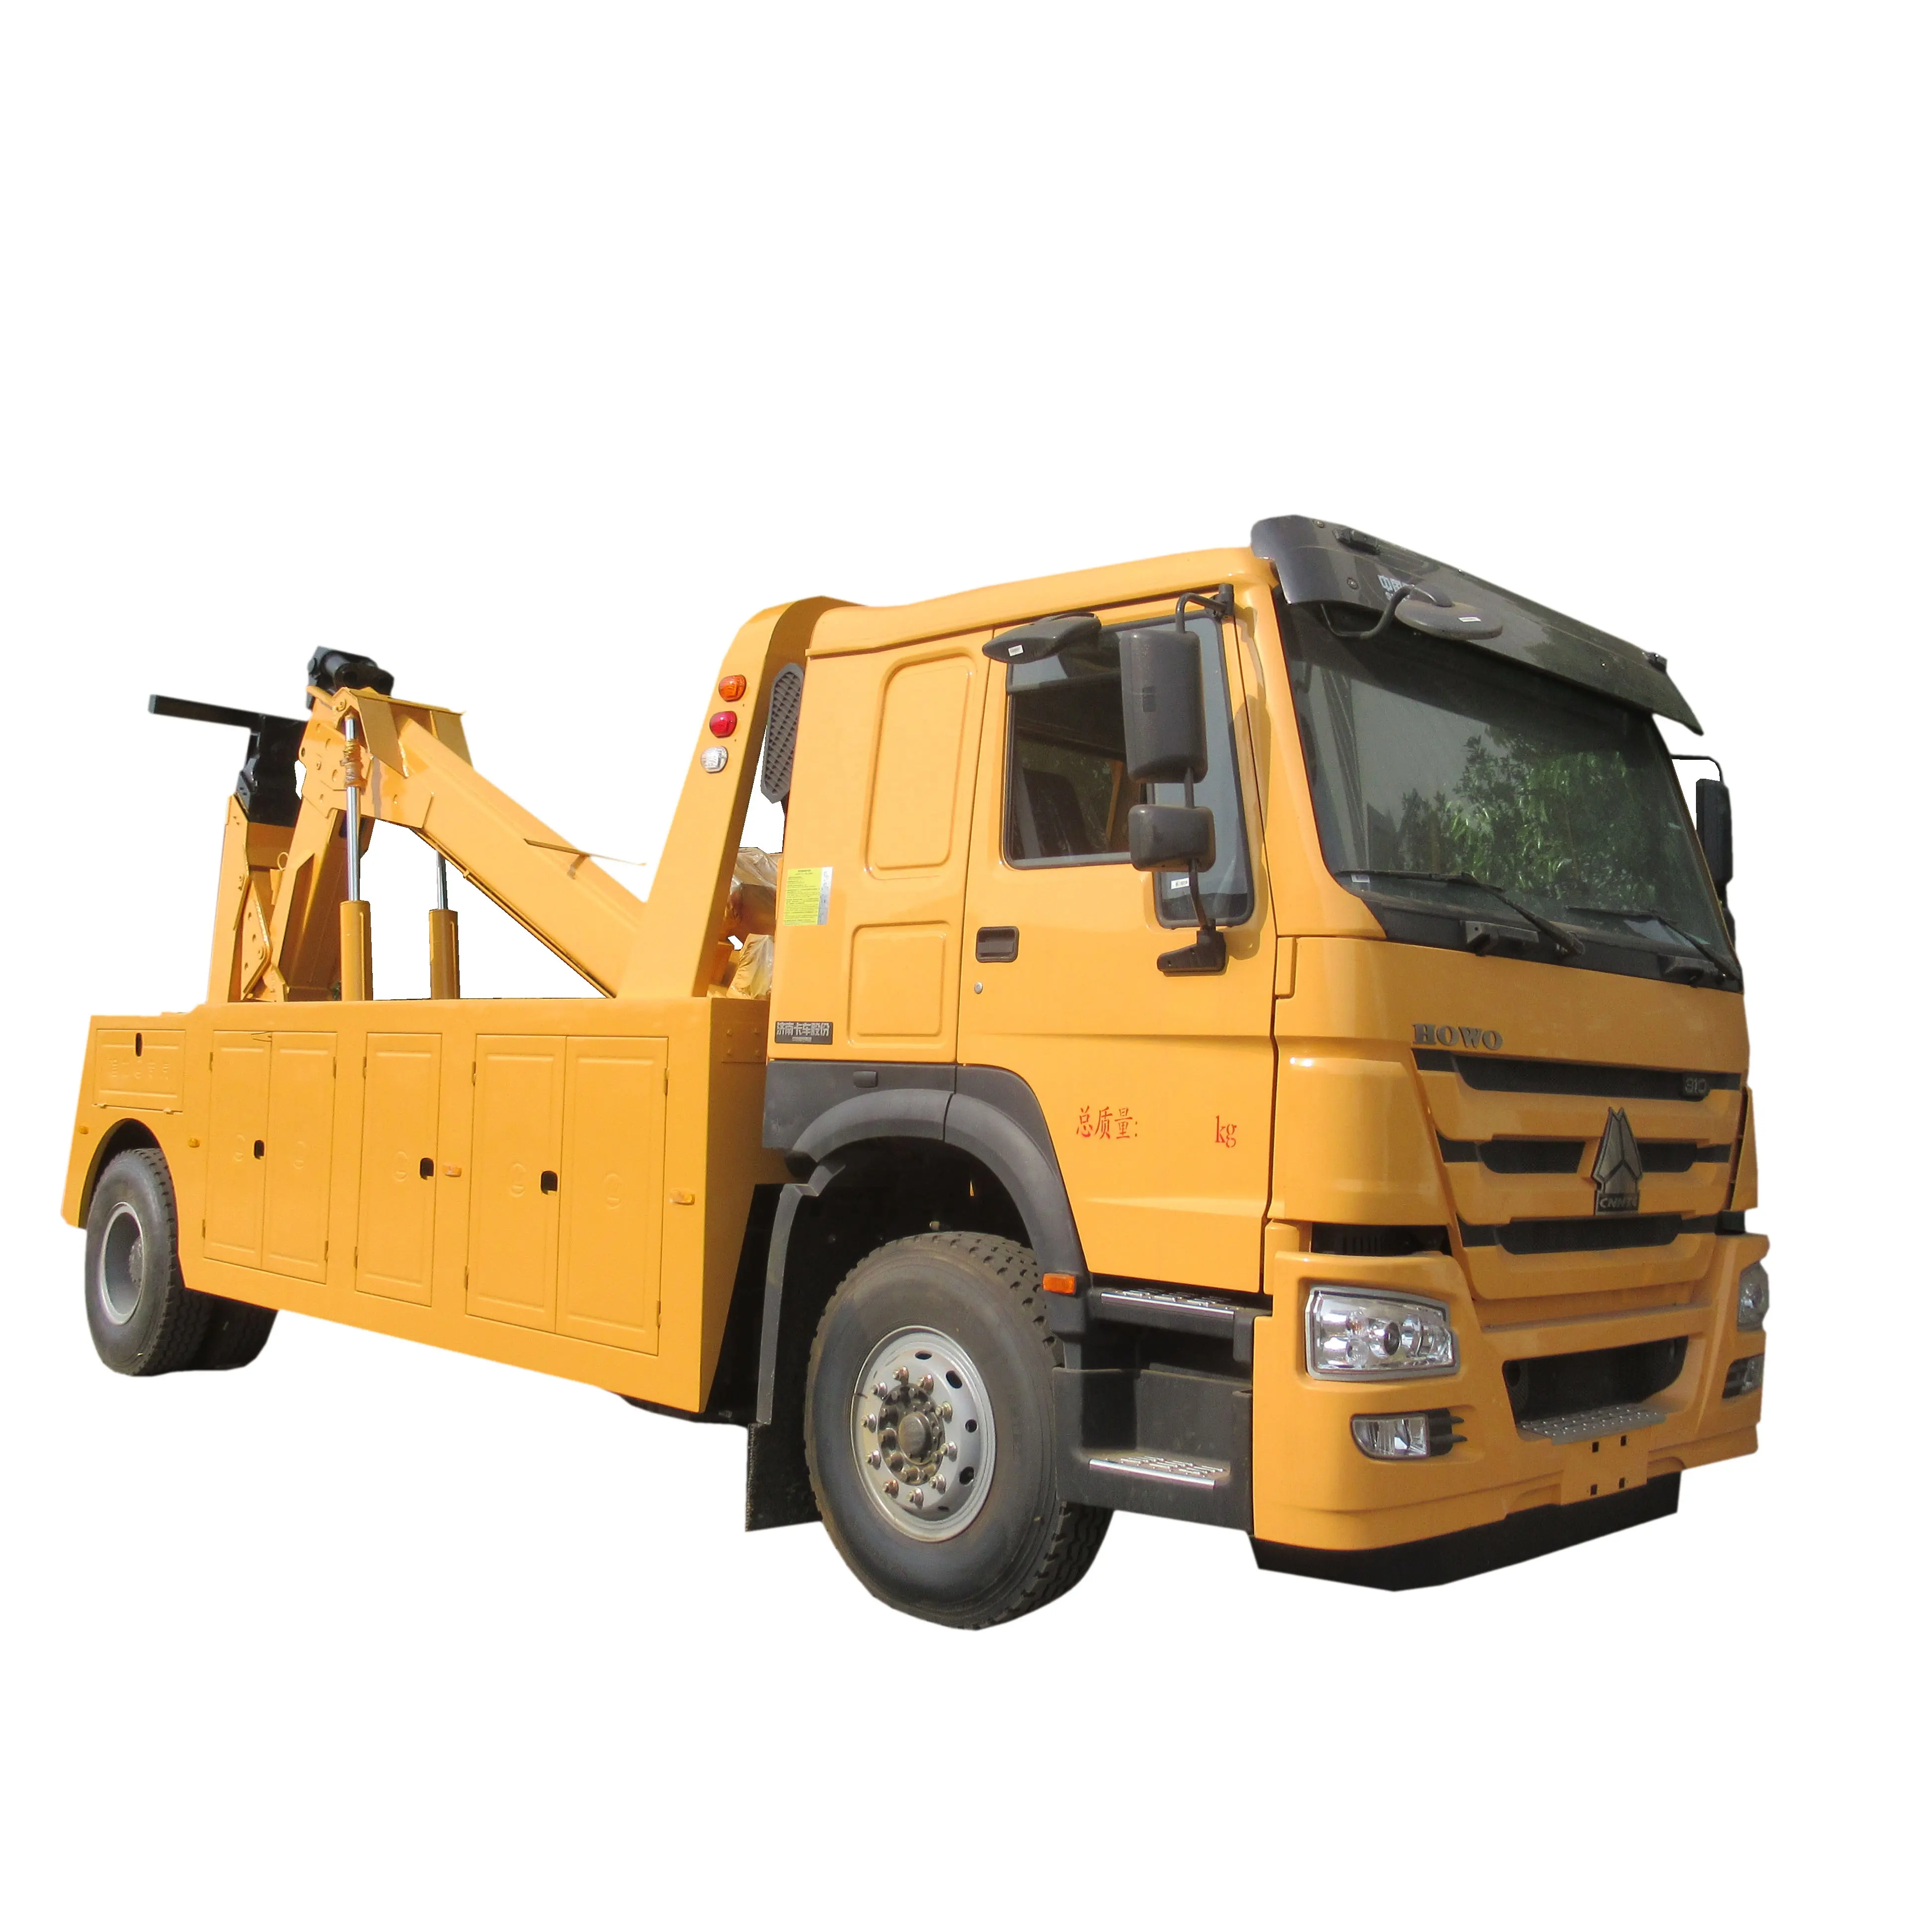 CLW brand 16ton wrecker bory receovery hydraulic car lift tow truck & wrecker howo tow truck for sale in dubai